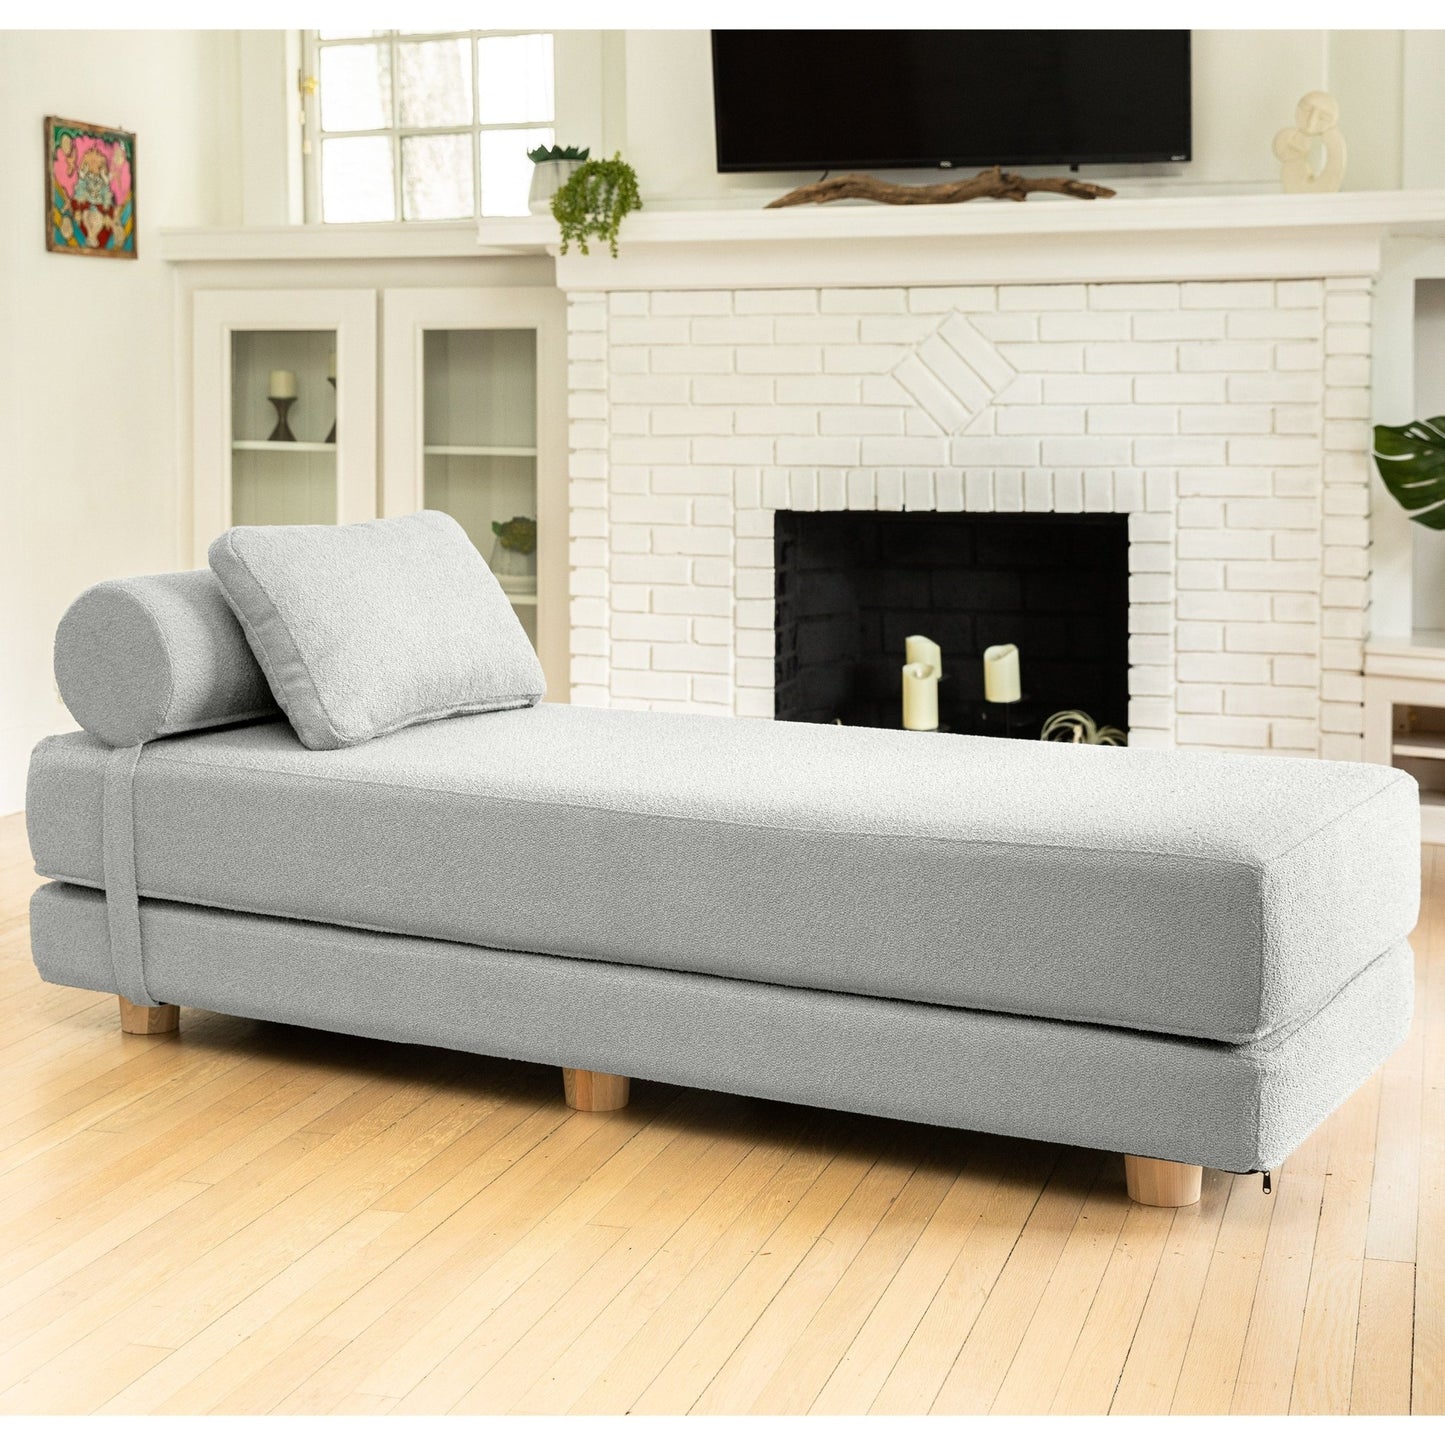 Jaxx Avida Daybed - Fold Out Queen Sleeper - Premium Boucle: Sleek and Modern Lounge for Relaxing and Overnight Guests (19436) - SchoolOutlet